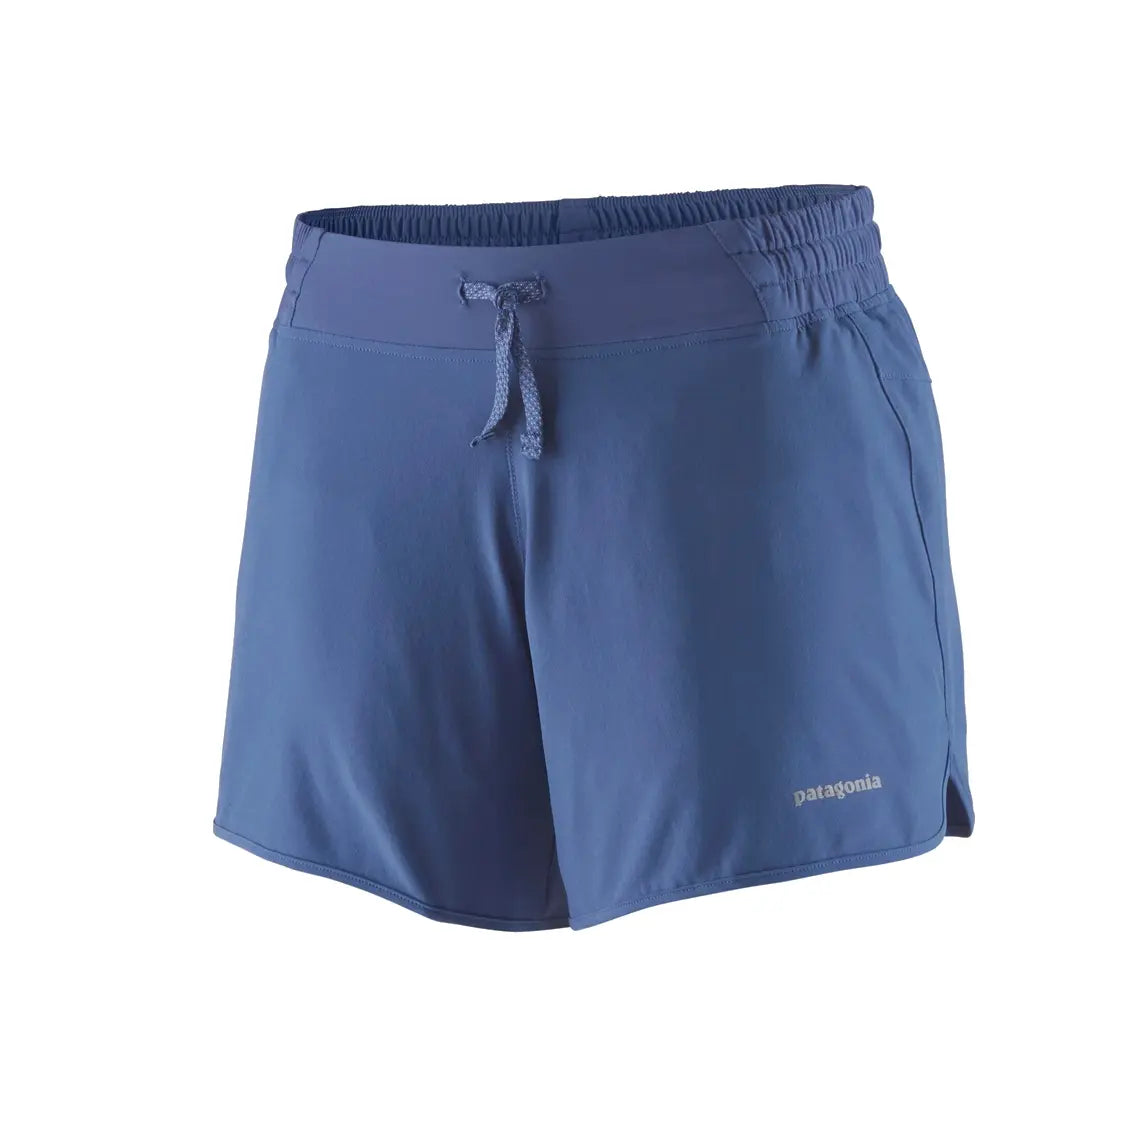 Womens Patagonia Nine Trails Shorts 6 inch - Current Blue